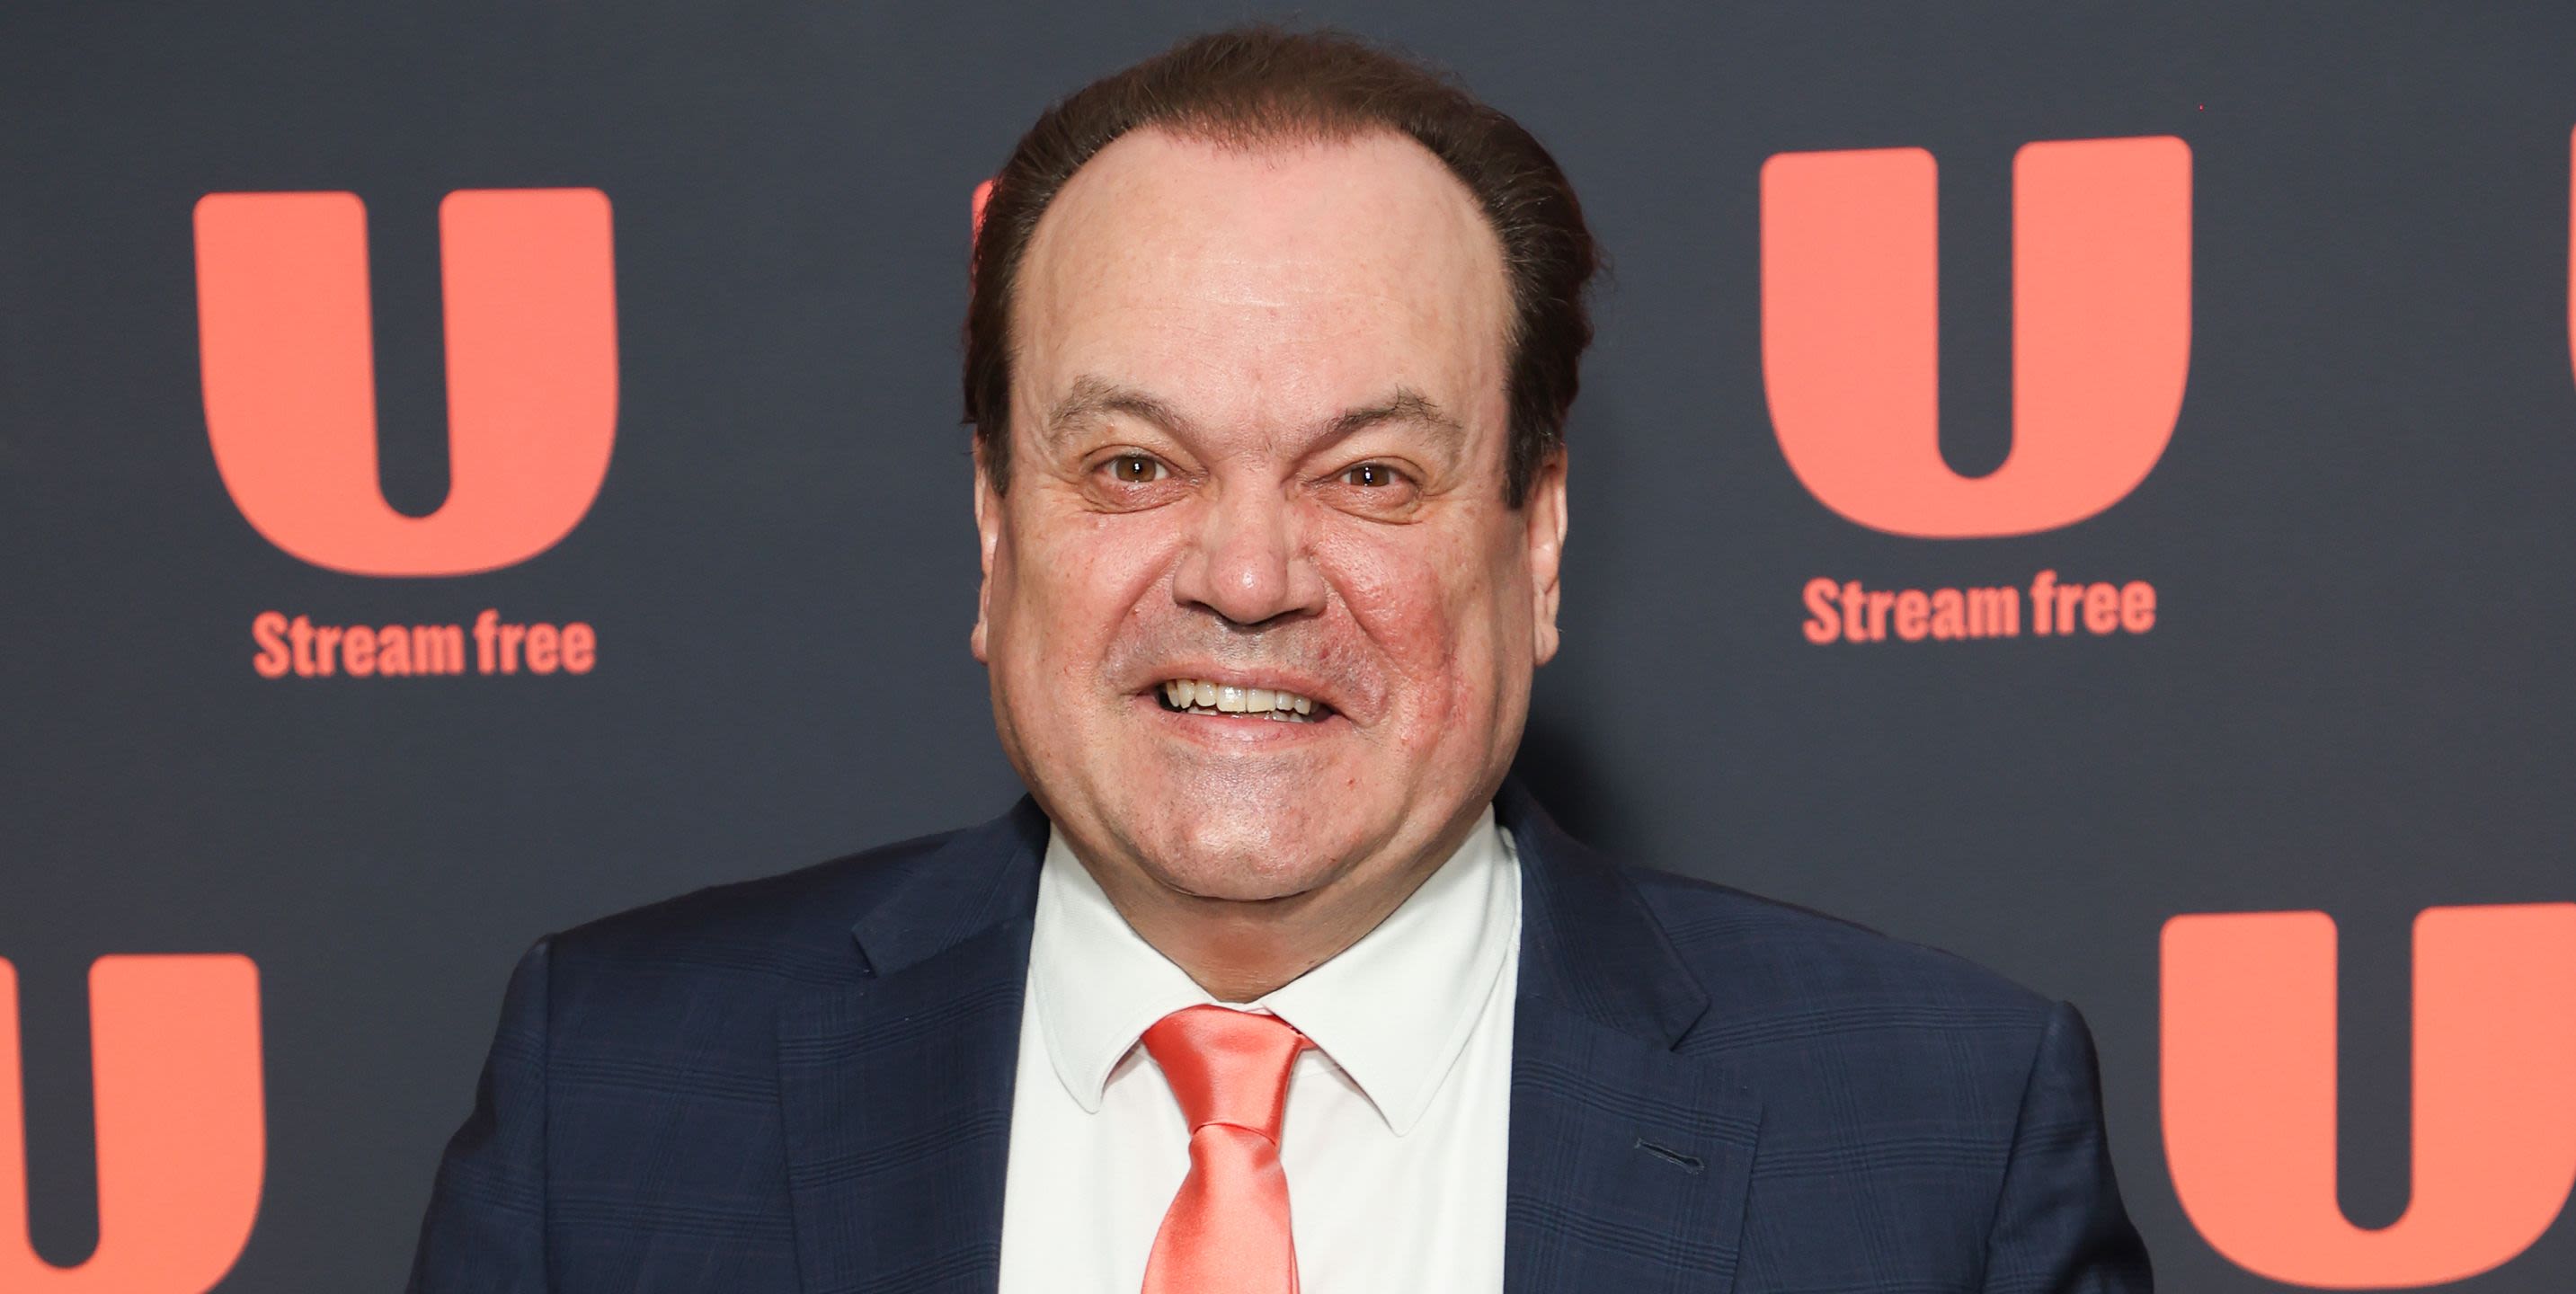 EastEnders' Shaun Williamson set for TV comeback in new comedy special